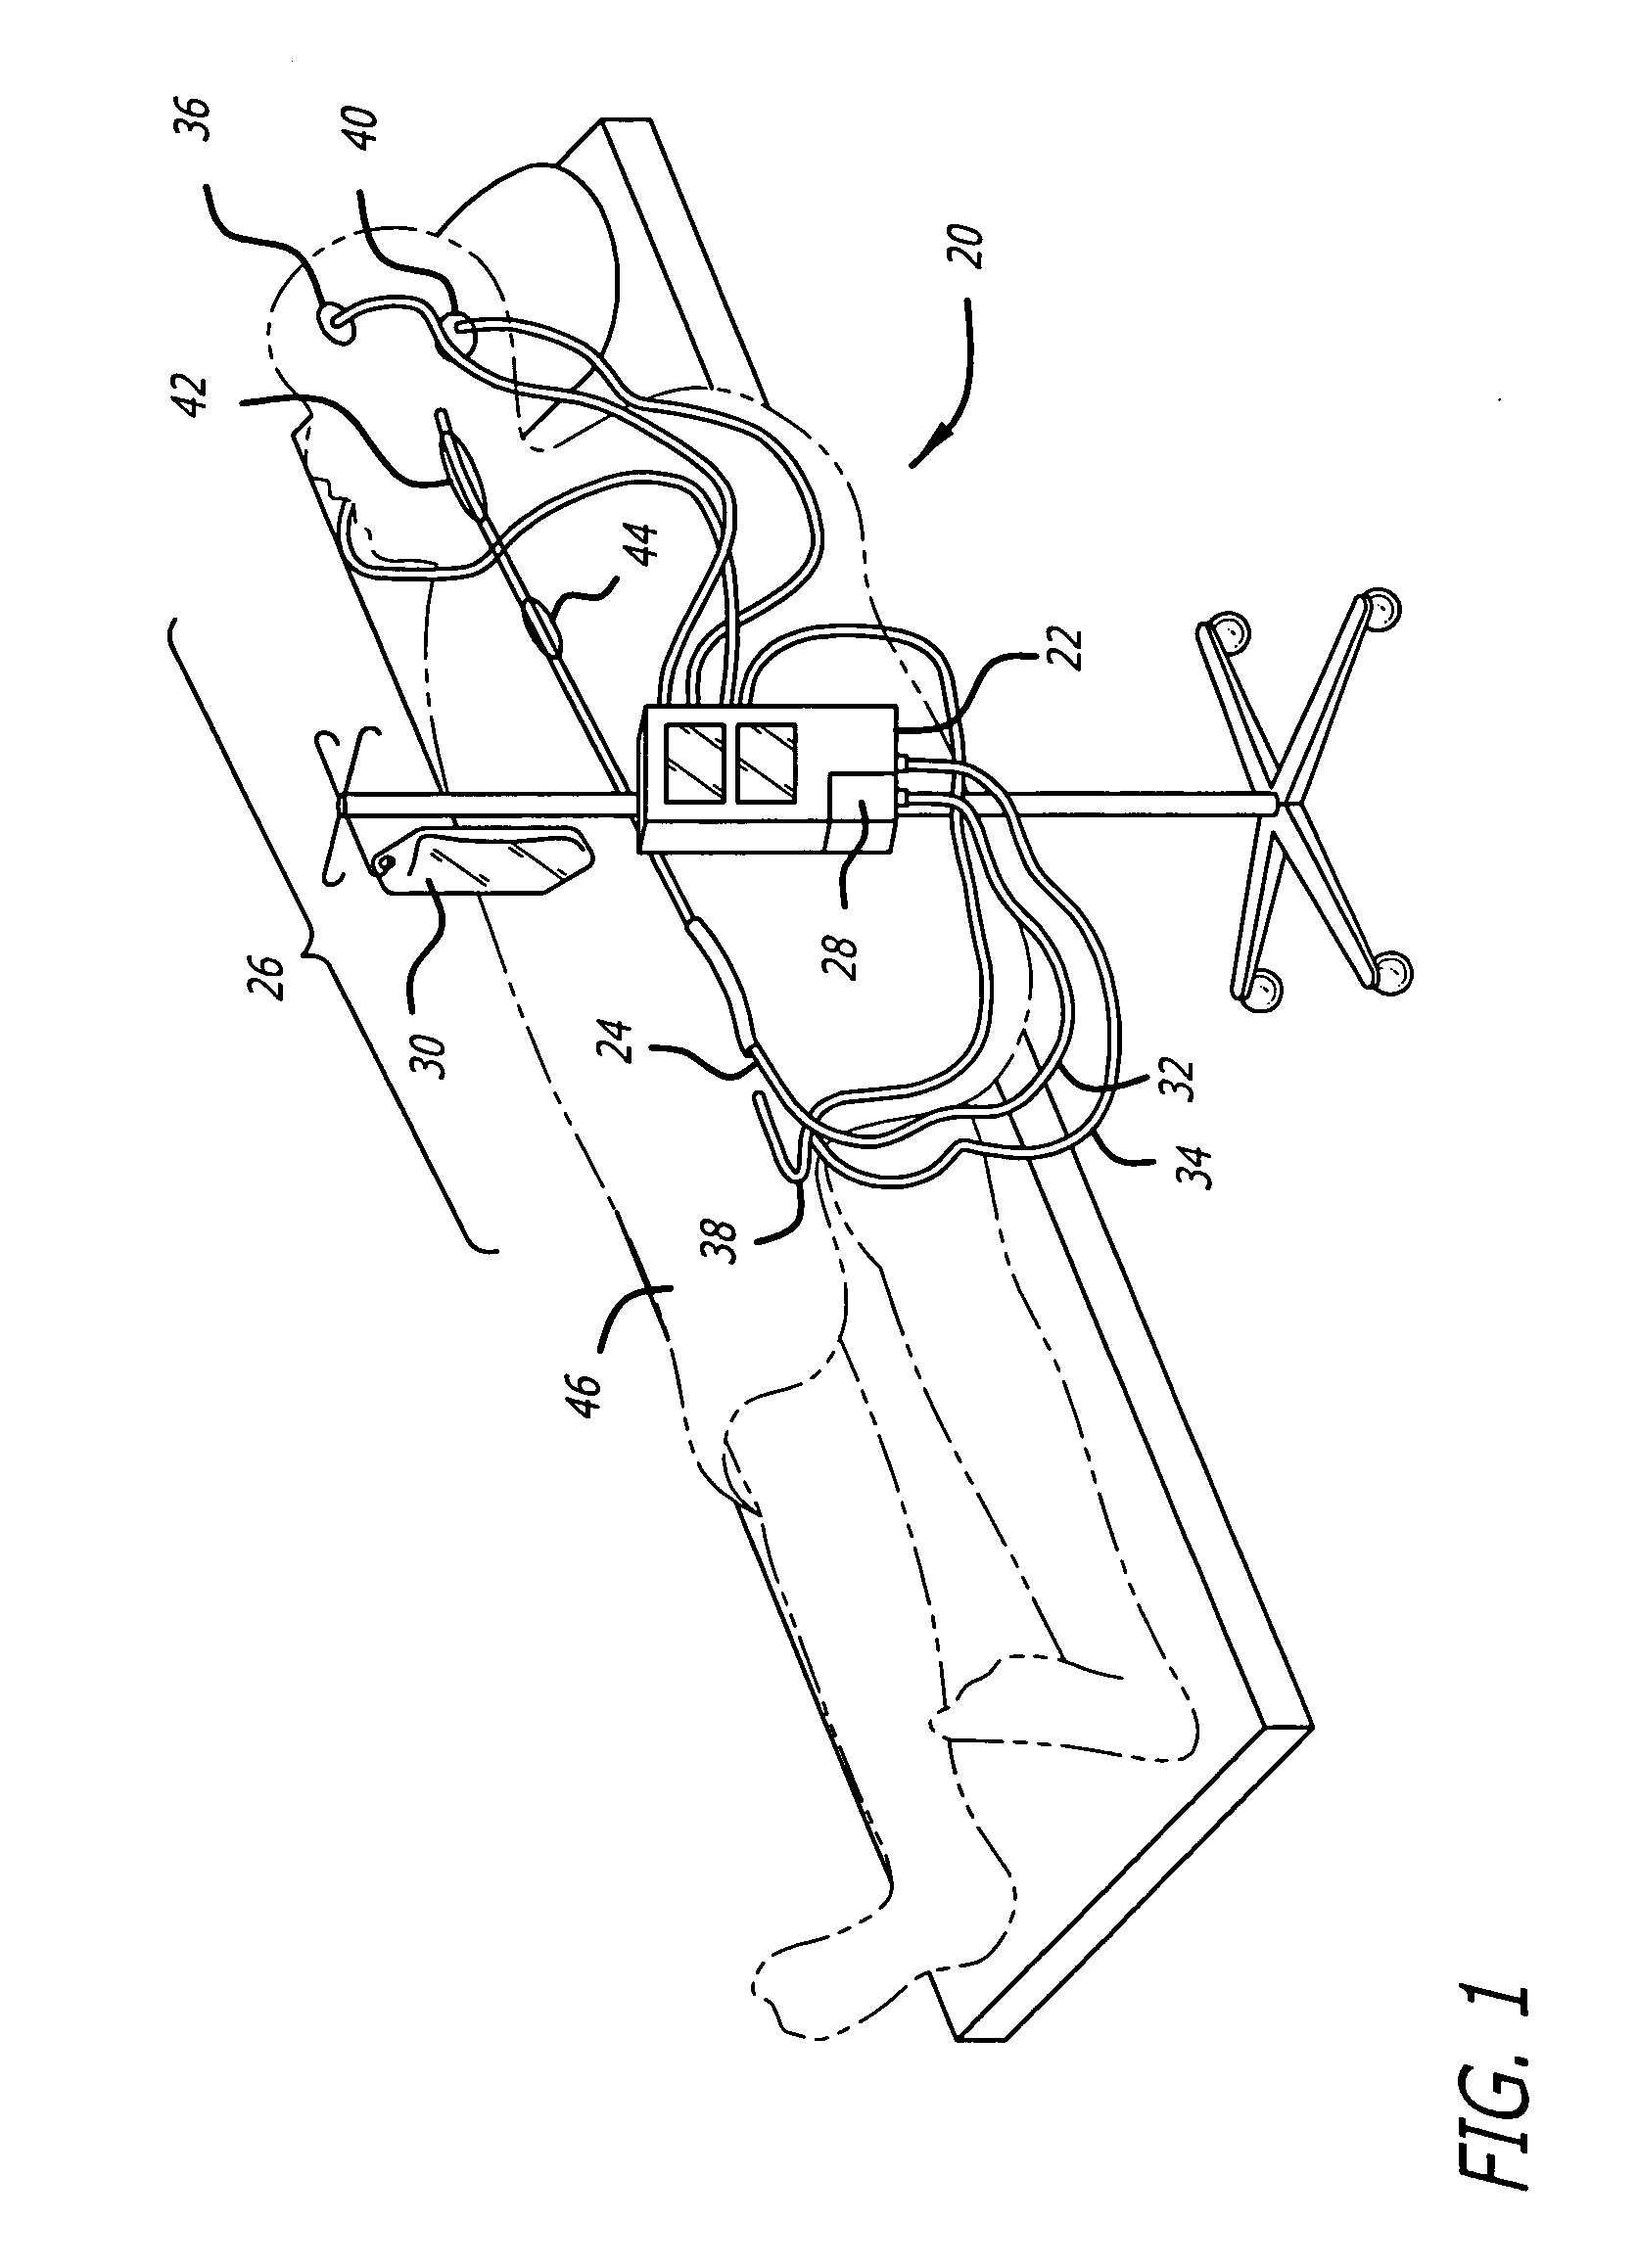 Apparatus and method for providing enhanced heat transfer from a body